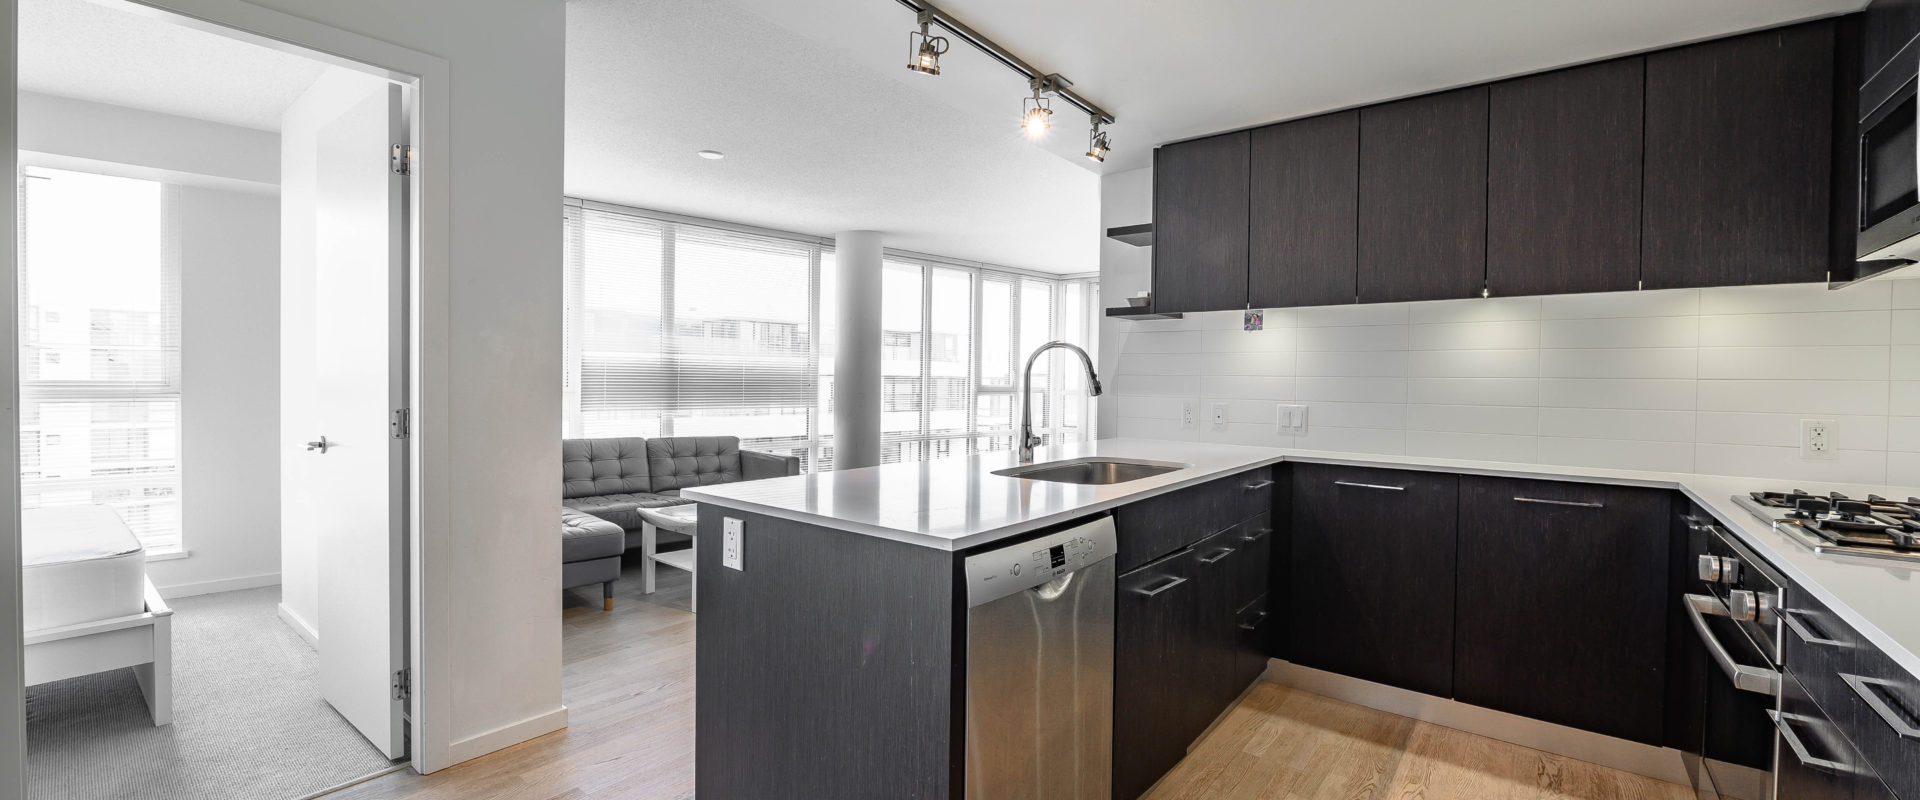 In the heart of richmond brand new Apartment with 2br+2ba